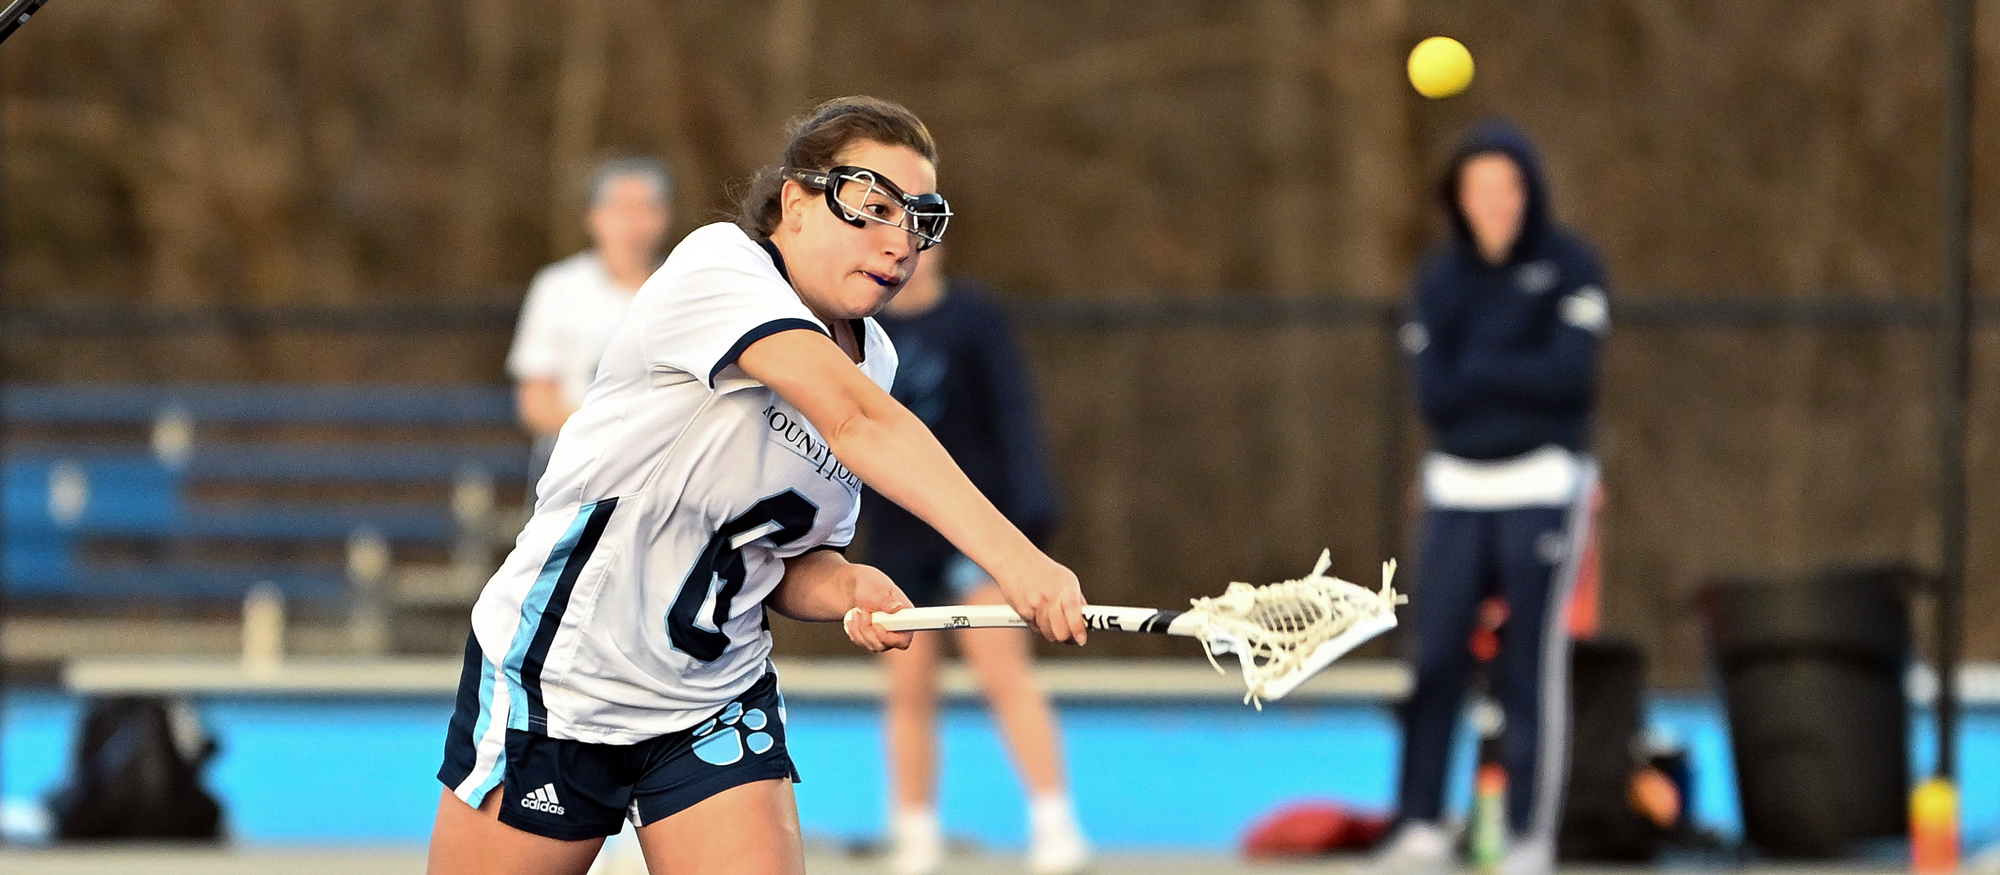 Marielle Welch netted her first goal of the season on Mount Holyoke's game at Nichols on Feb. 28, 2024. (RJB Sports file photo)